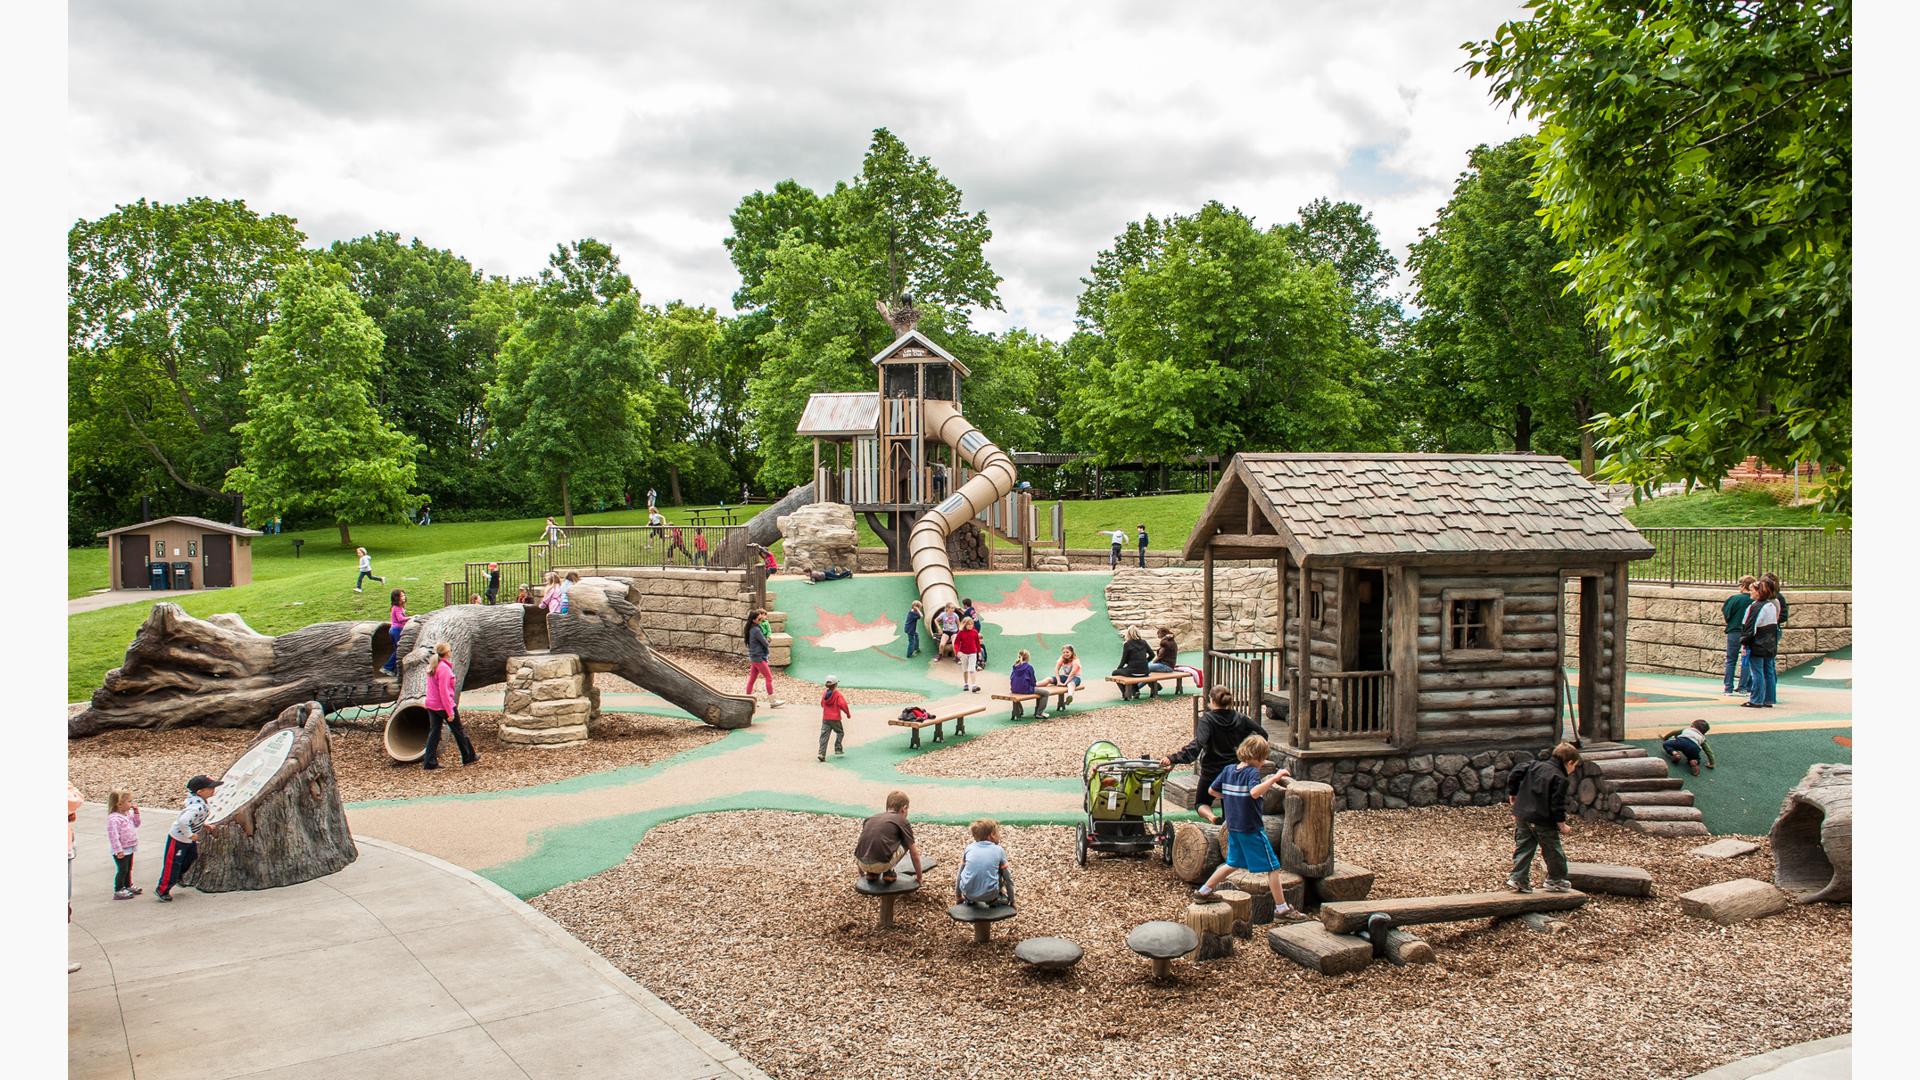 Lake Rebecca Park Reserve, Rockford, MN. A nature-inspired PlayBooster® with three unique levels features The giant split log, holes and other secret nooks and crannies.